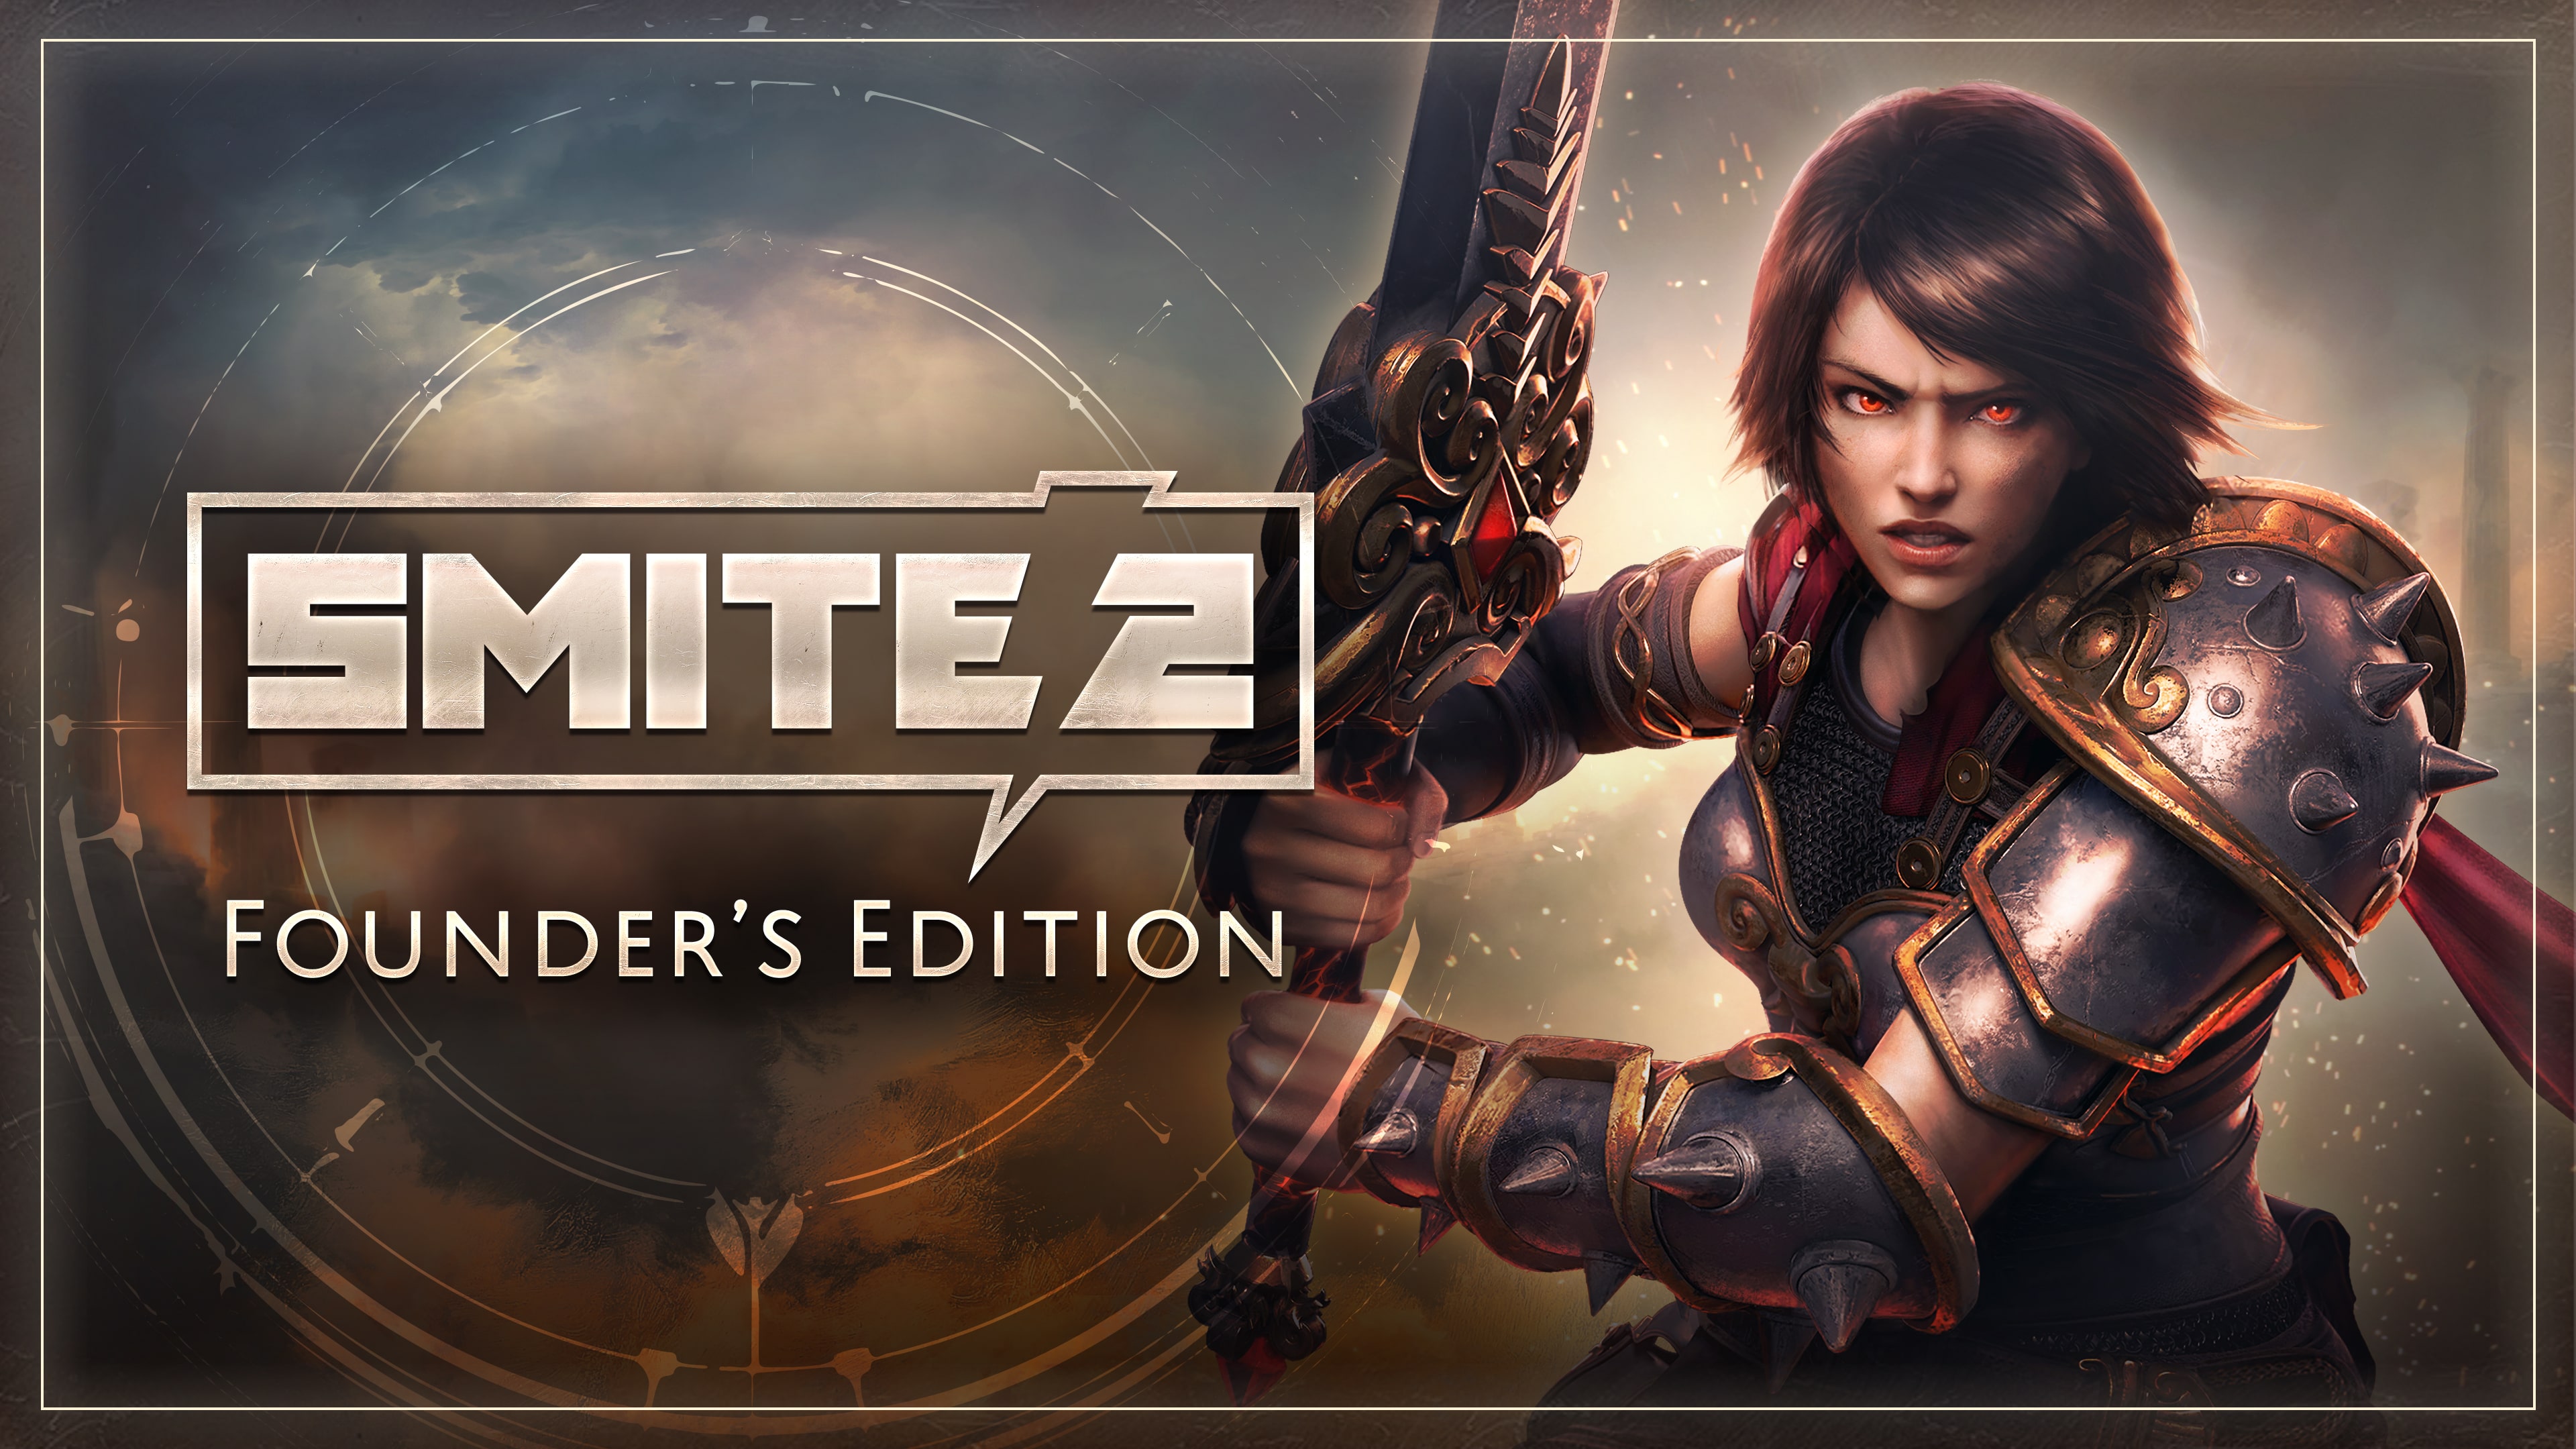 SMITE 2 Founder’s Edition